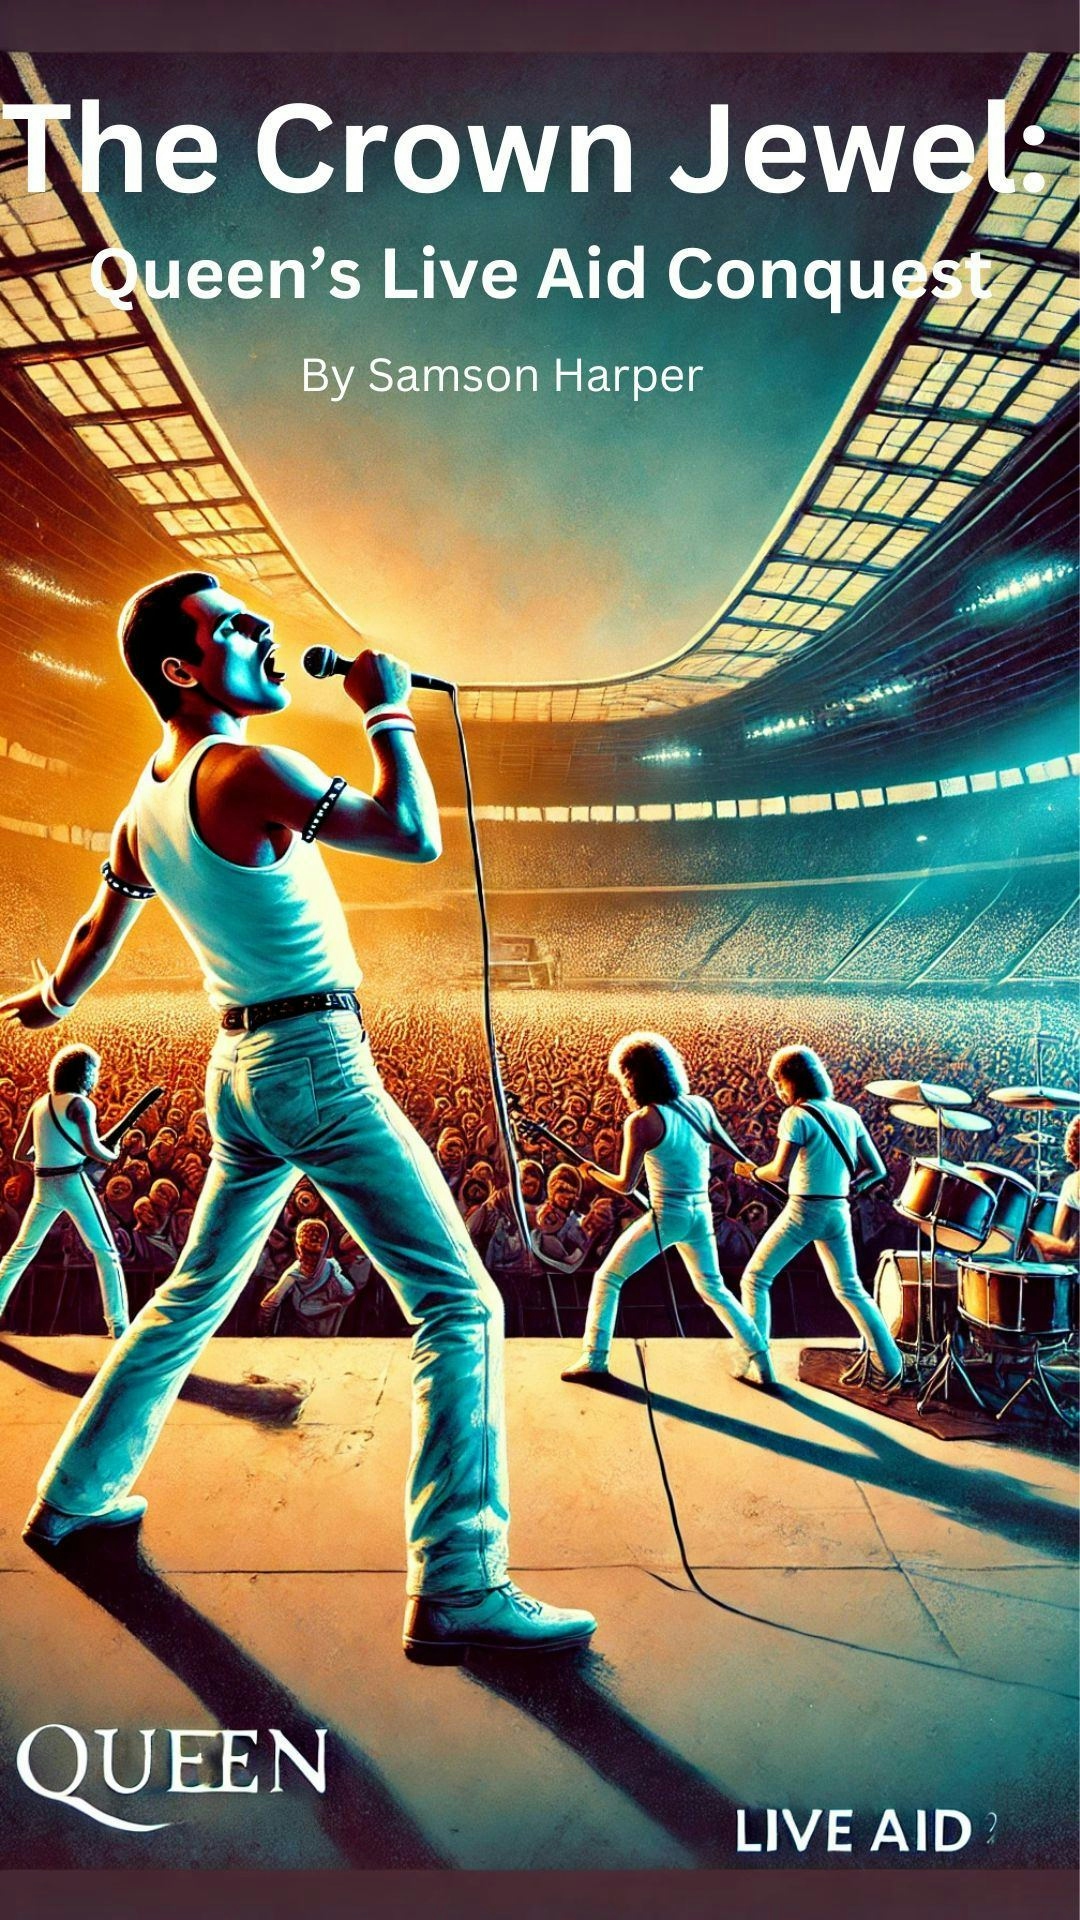 The Crown Jewel: Queen’s Live Aid Conquest - Book Overview